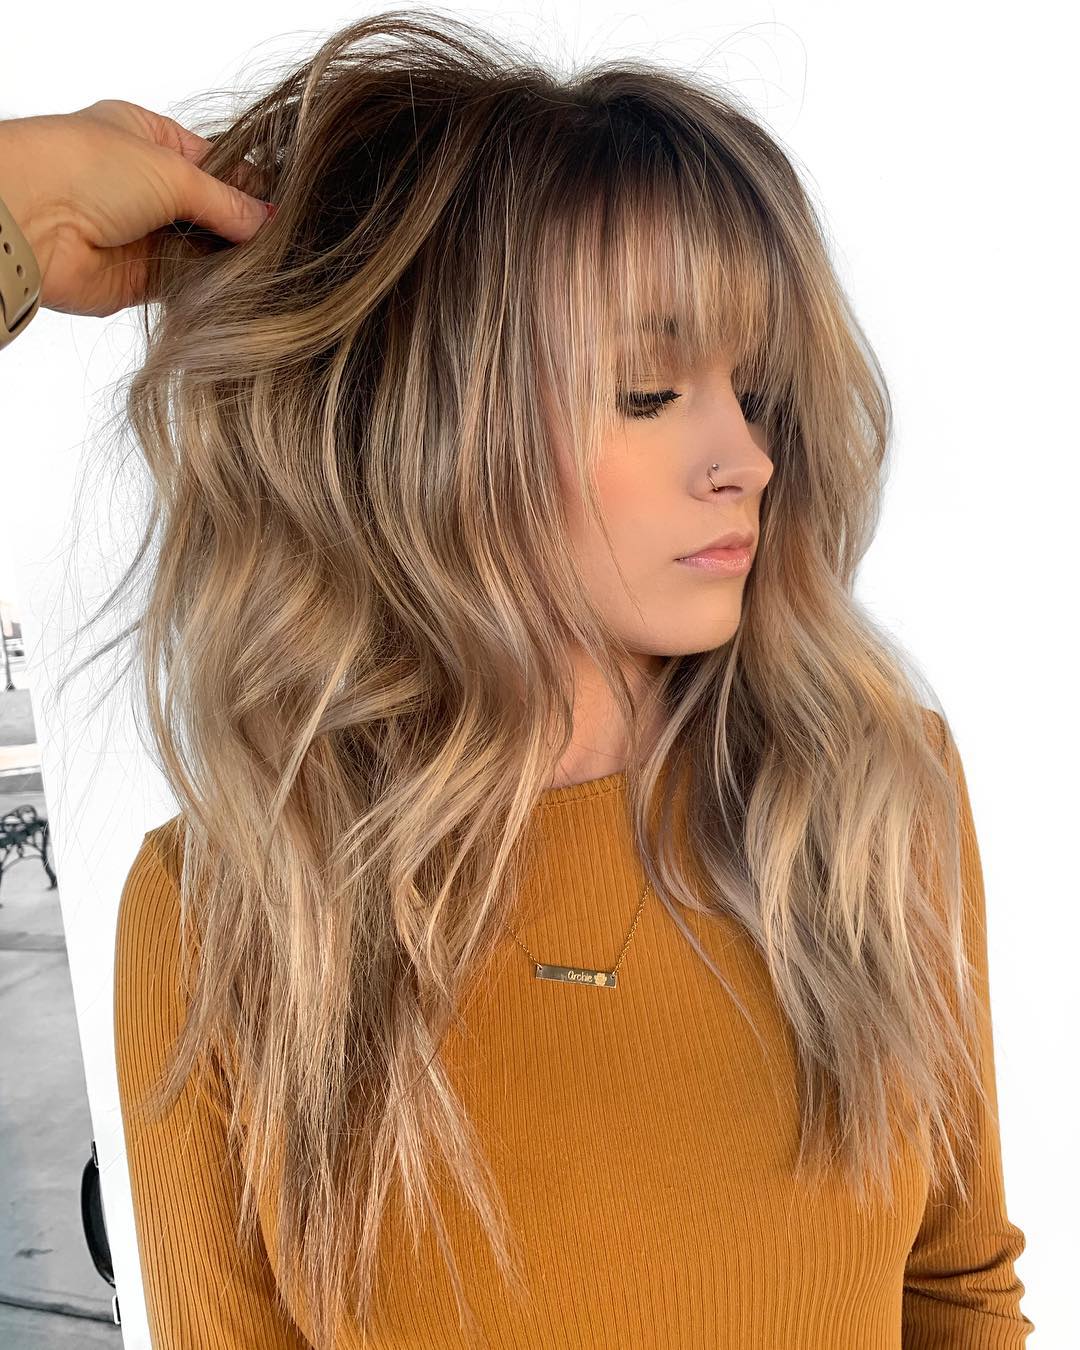 Feathery Textured Shag with Bangs on Bronde Balayage Hair